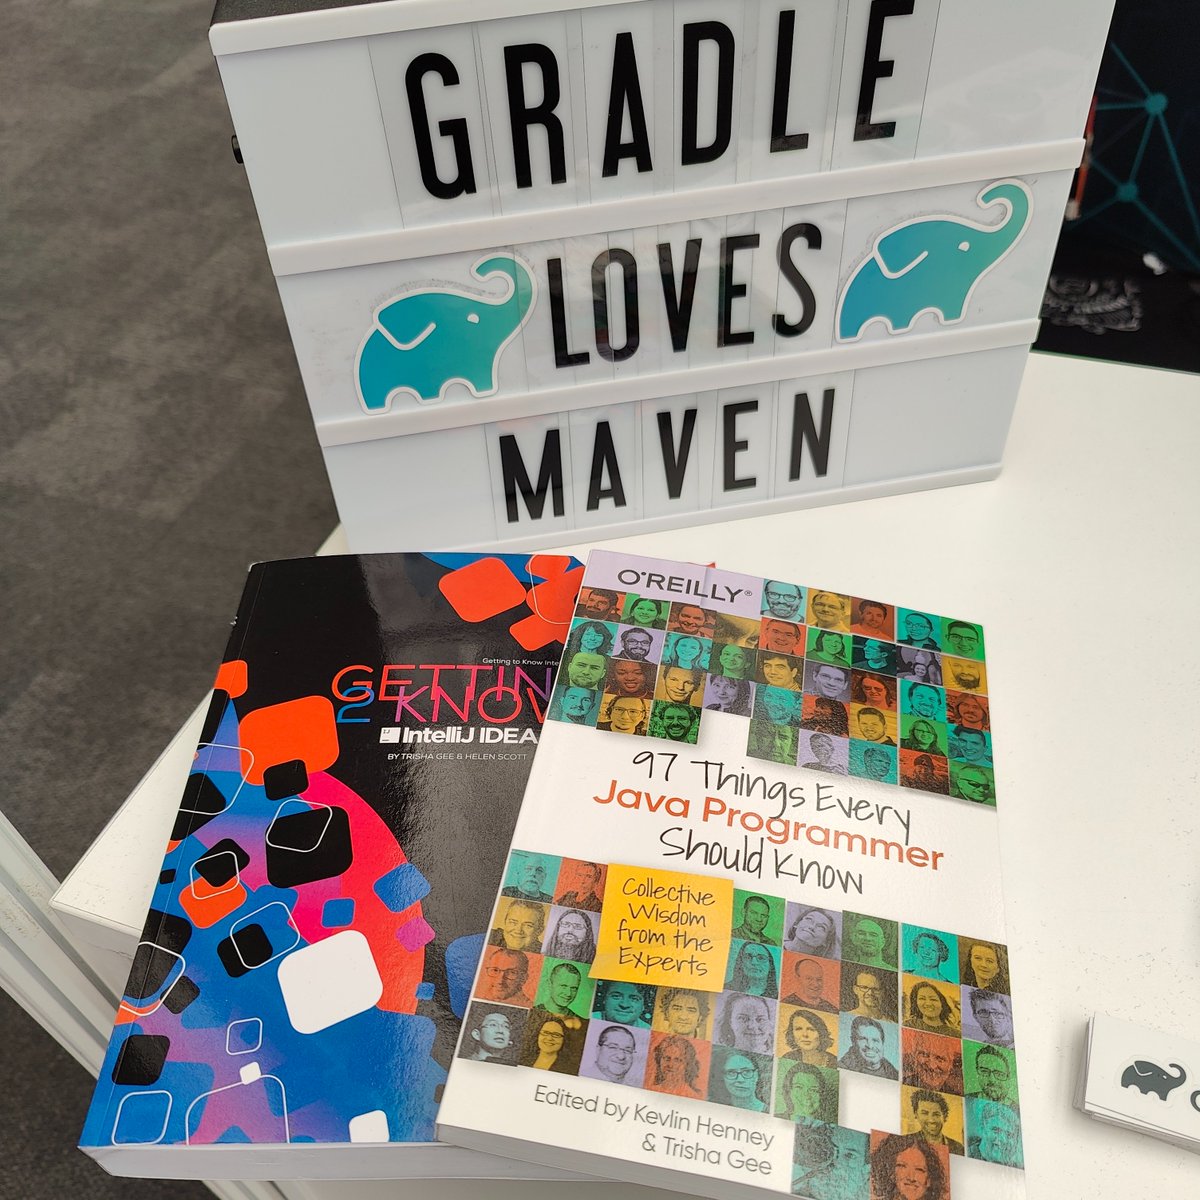 Winners of copies of 97 Things Every Java Programmer Should Know and Getting to Know IntelliJ IDEA have been informed! Check you mail, and if you're a lucky winner come to the @gradle booth at #DevoxxUK to pick it up